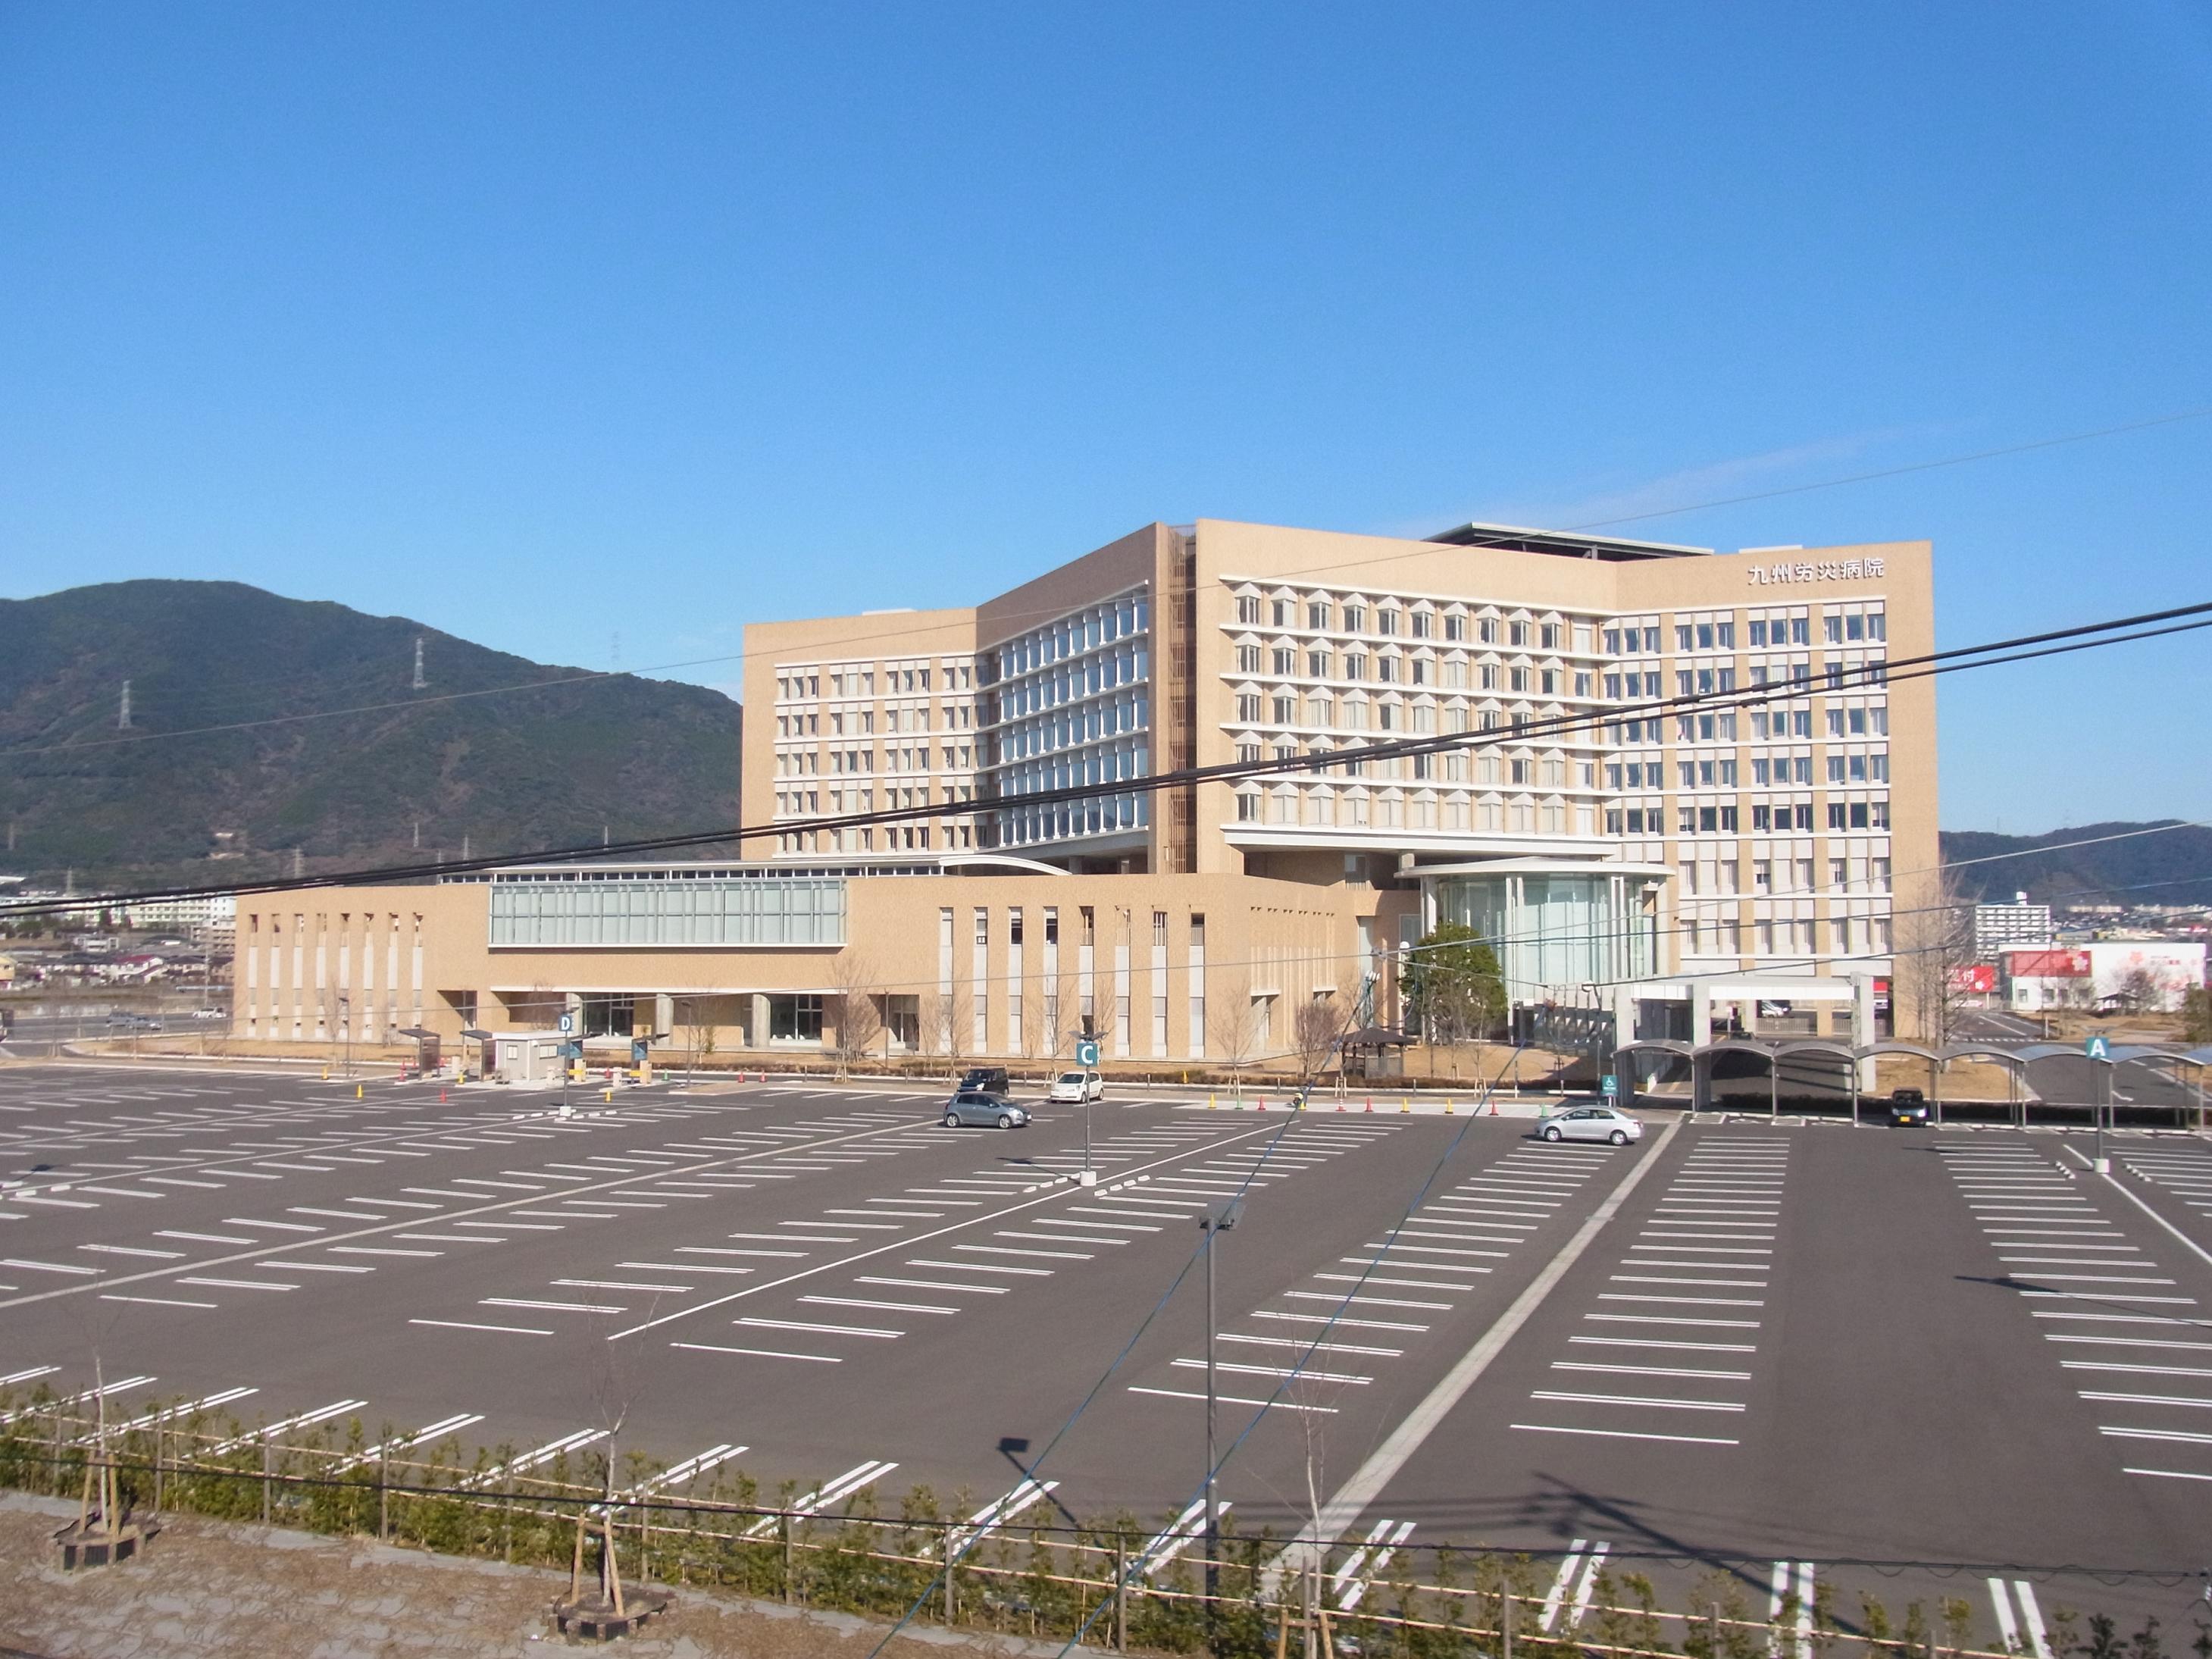 Hospital. 985m to the National Institute of Labor Health and Welfare Organization Kyushurosaibyoin (hospital)